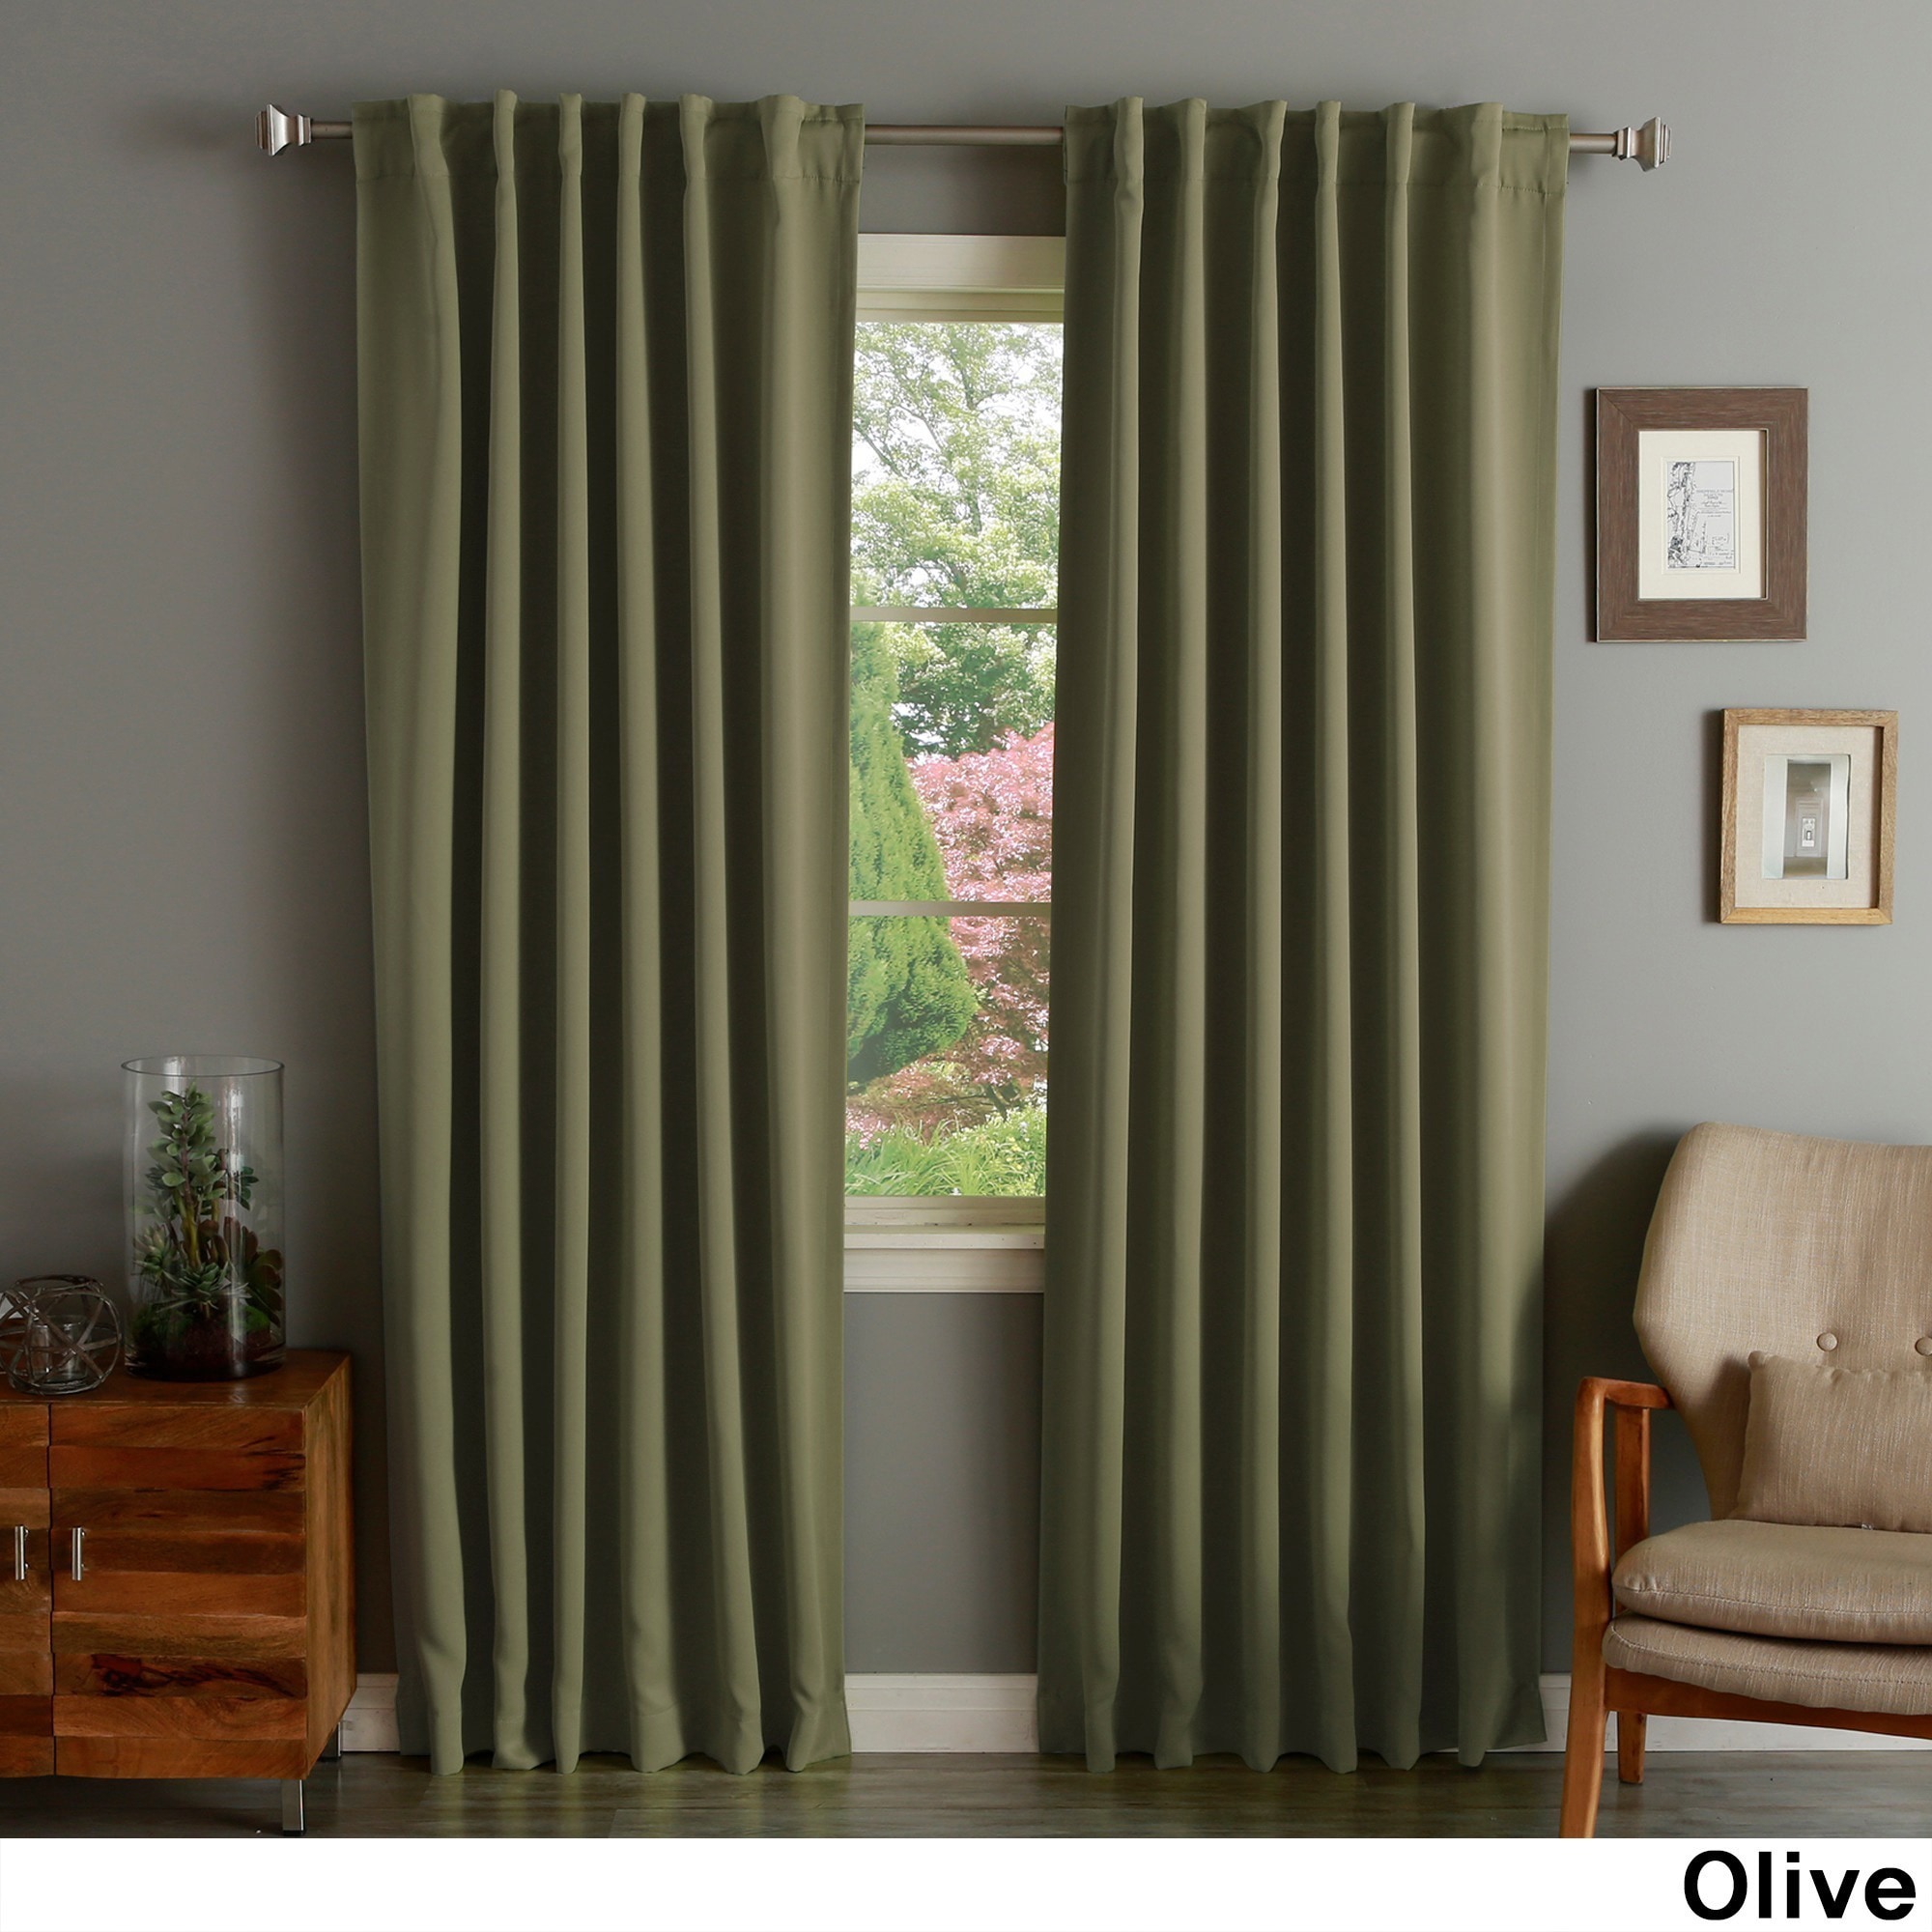 Aurora Home Solid Thermal Insulated 108-inch Blackout Curtain 